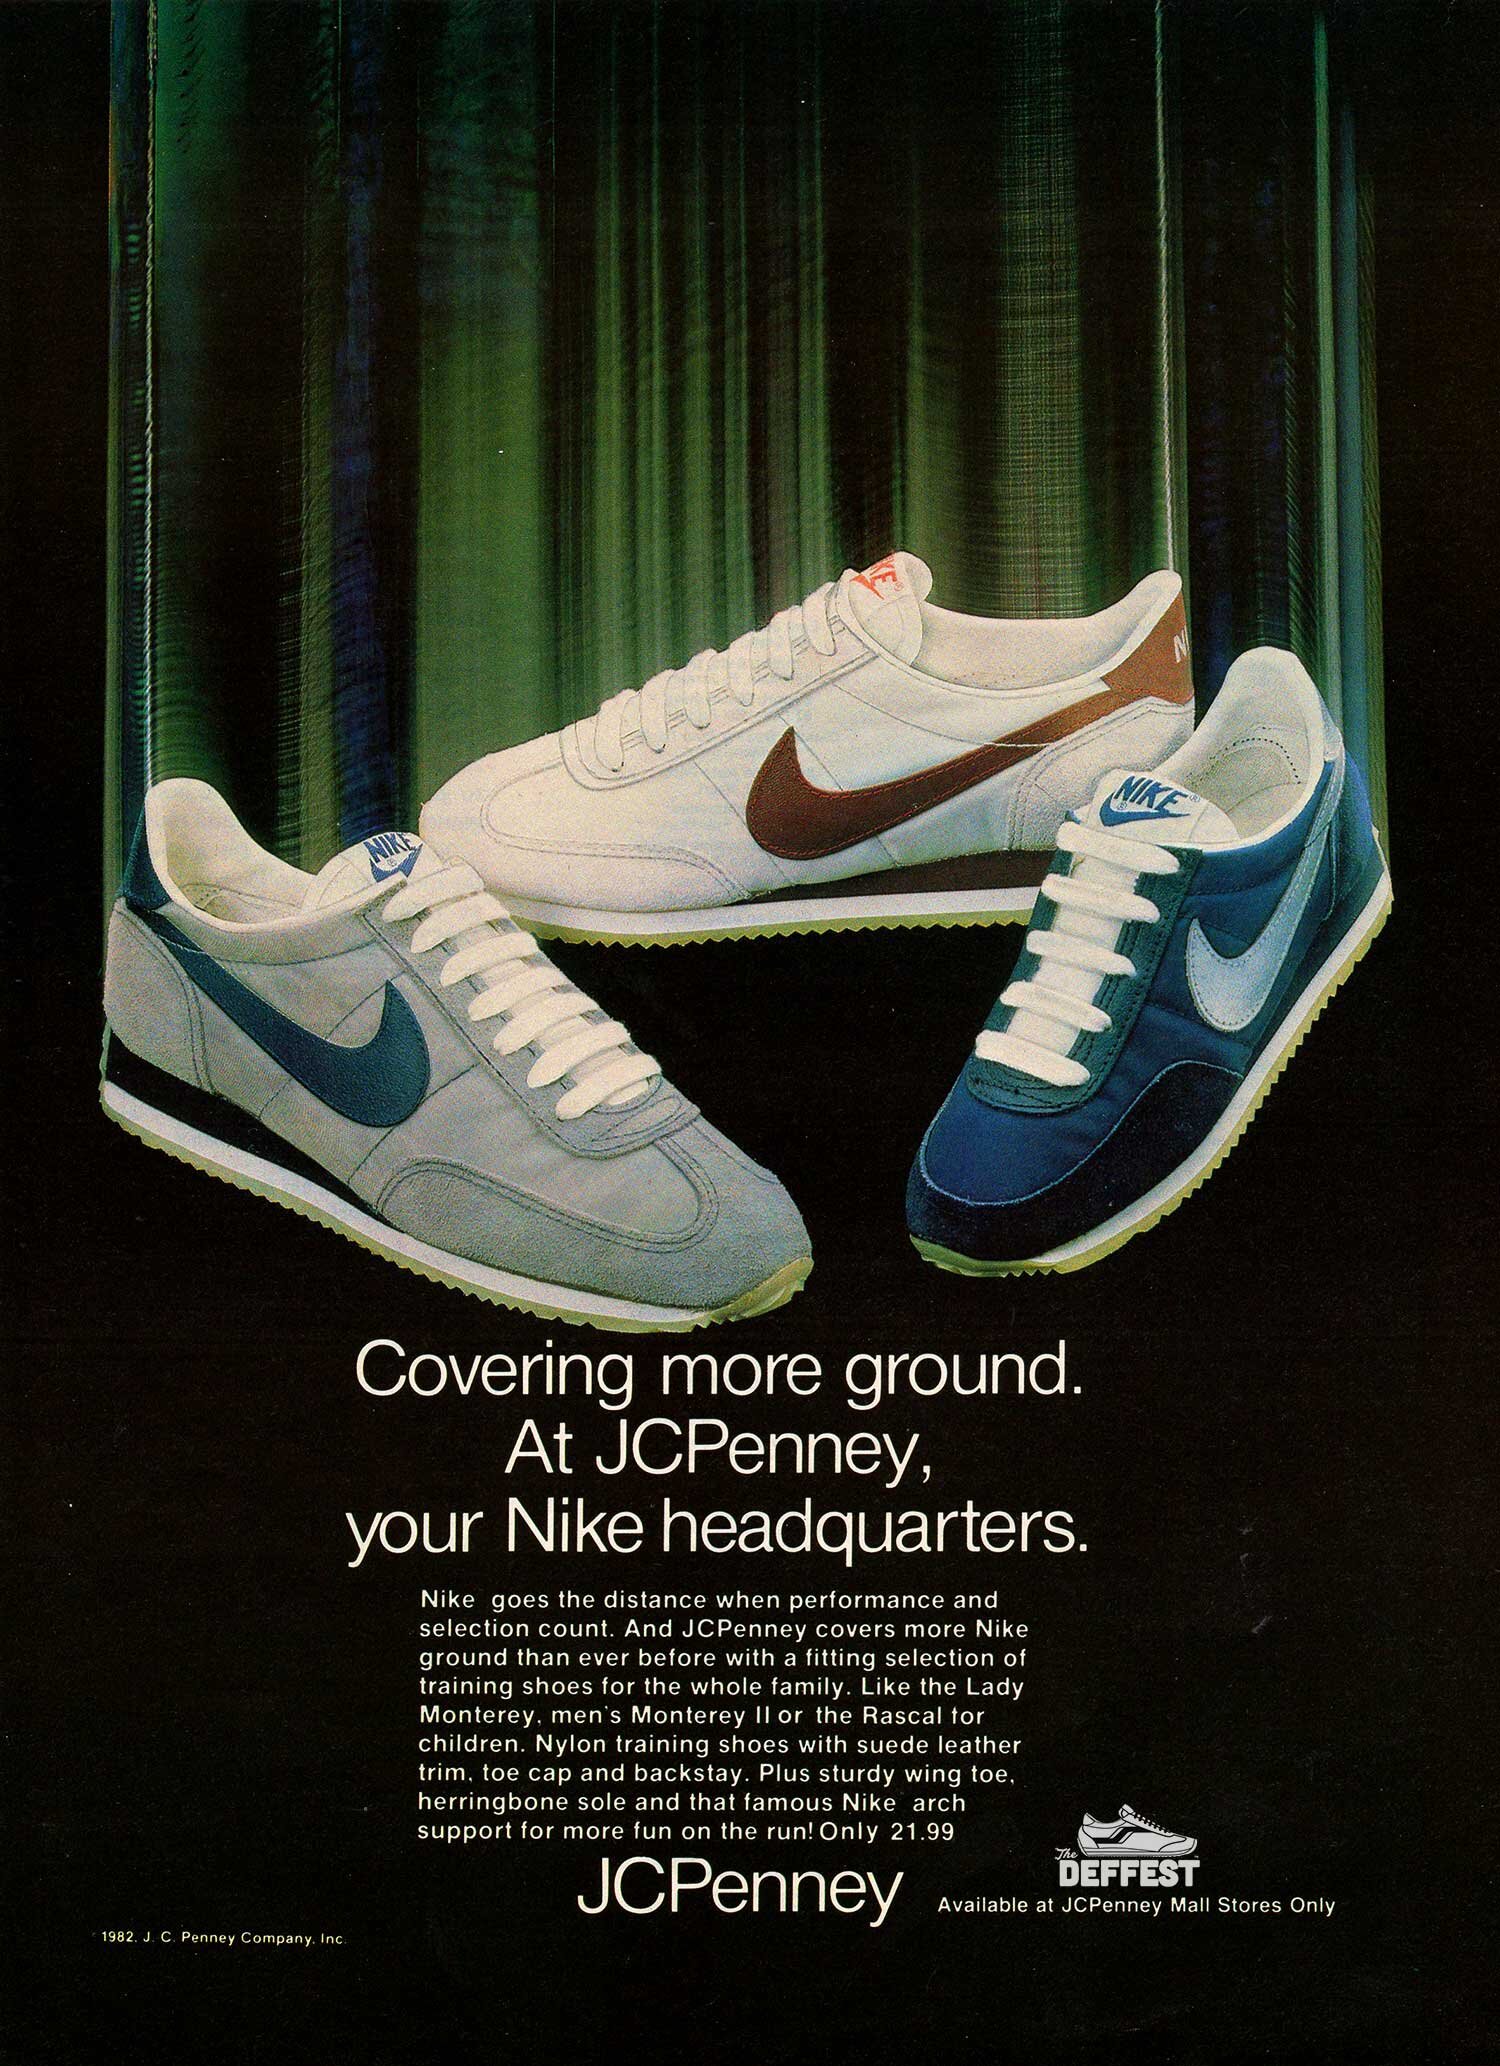 vintage Nike sneakers — The Deffest®. A vintage and retro sneaker